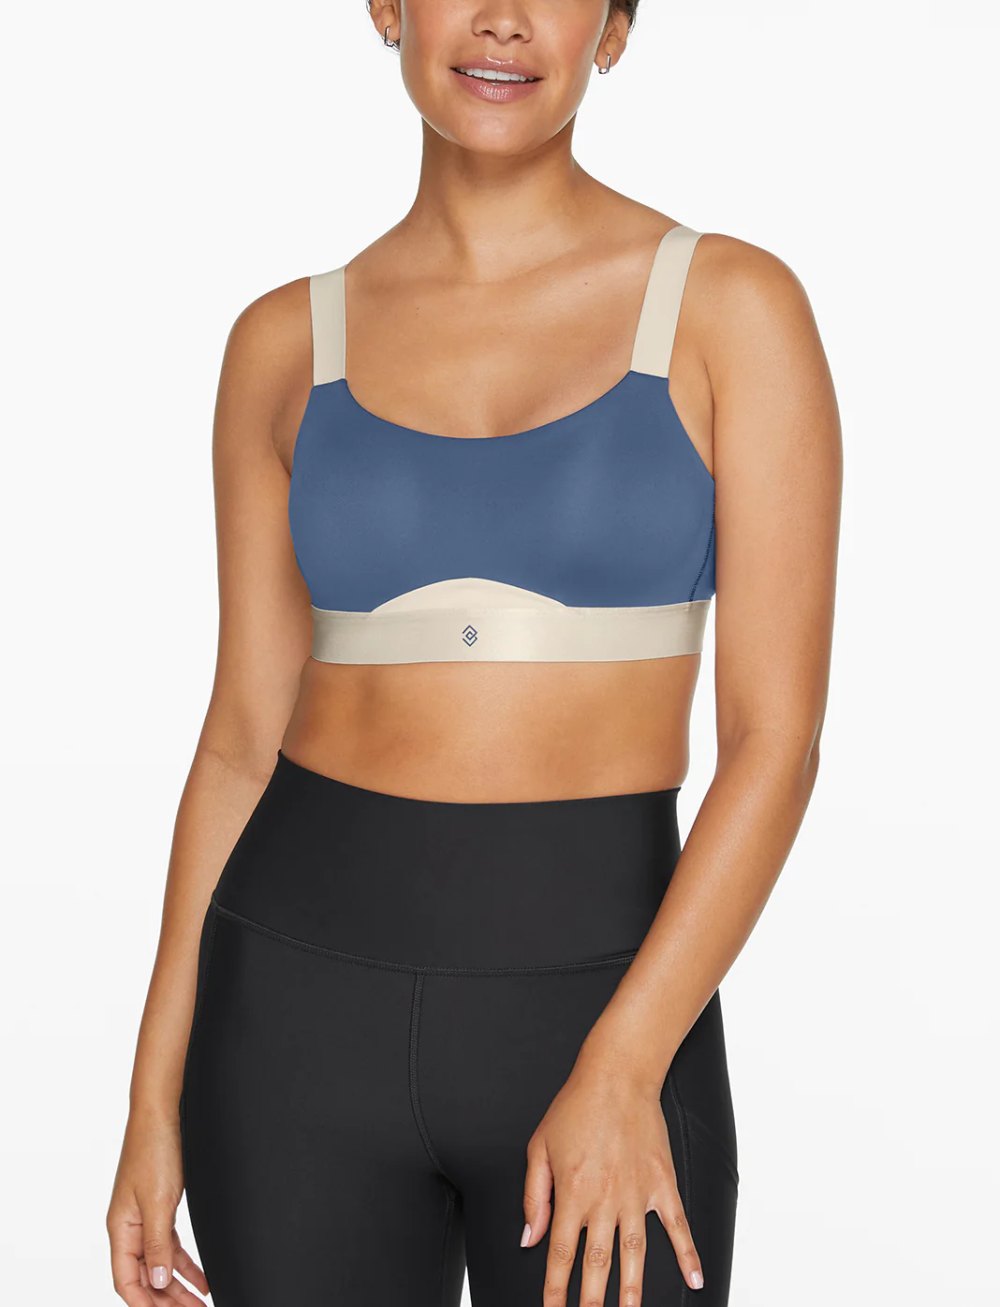 11 Best Sports Bras That Can Actually Support Larger Busts